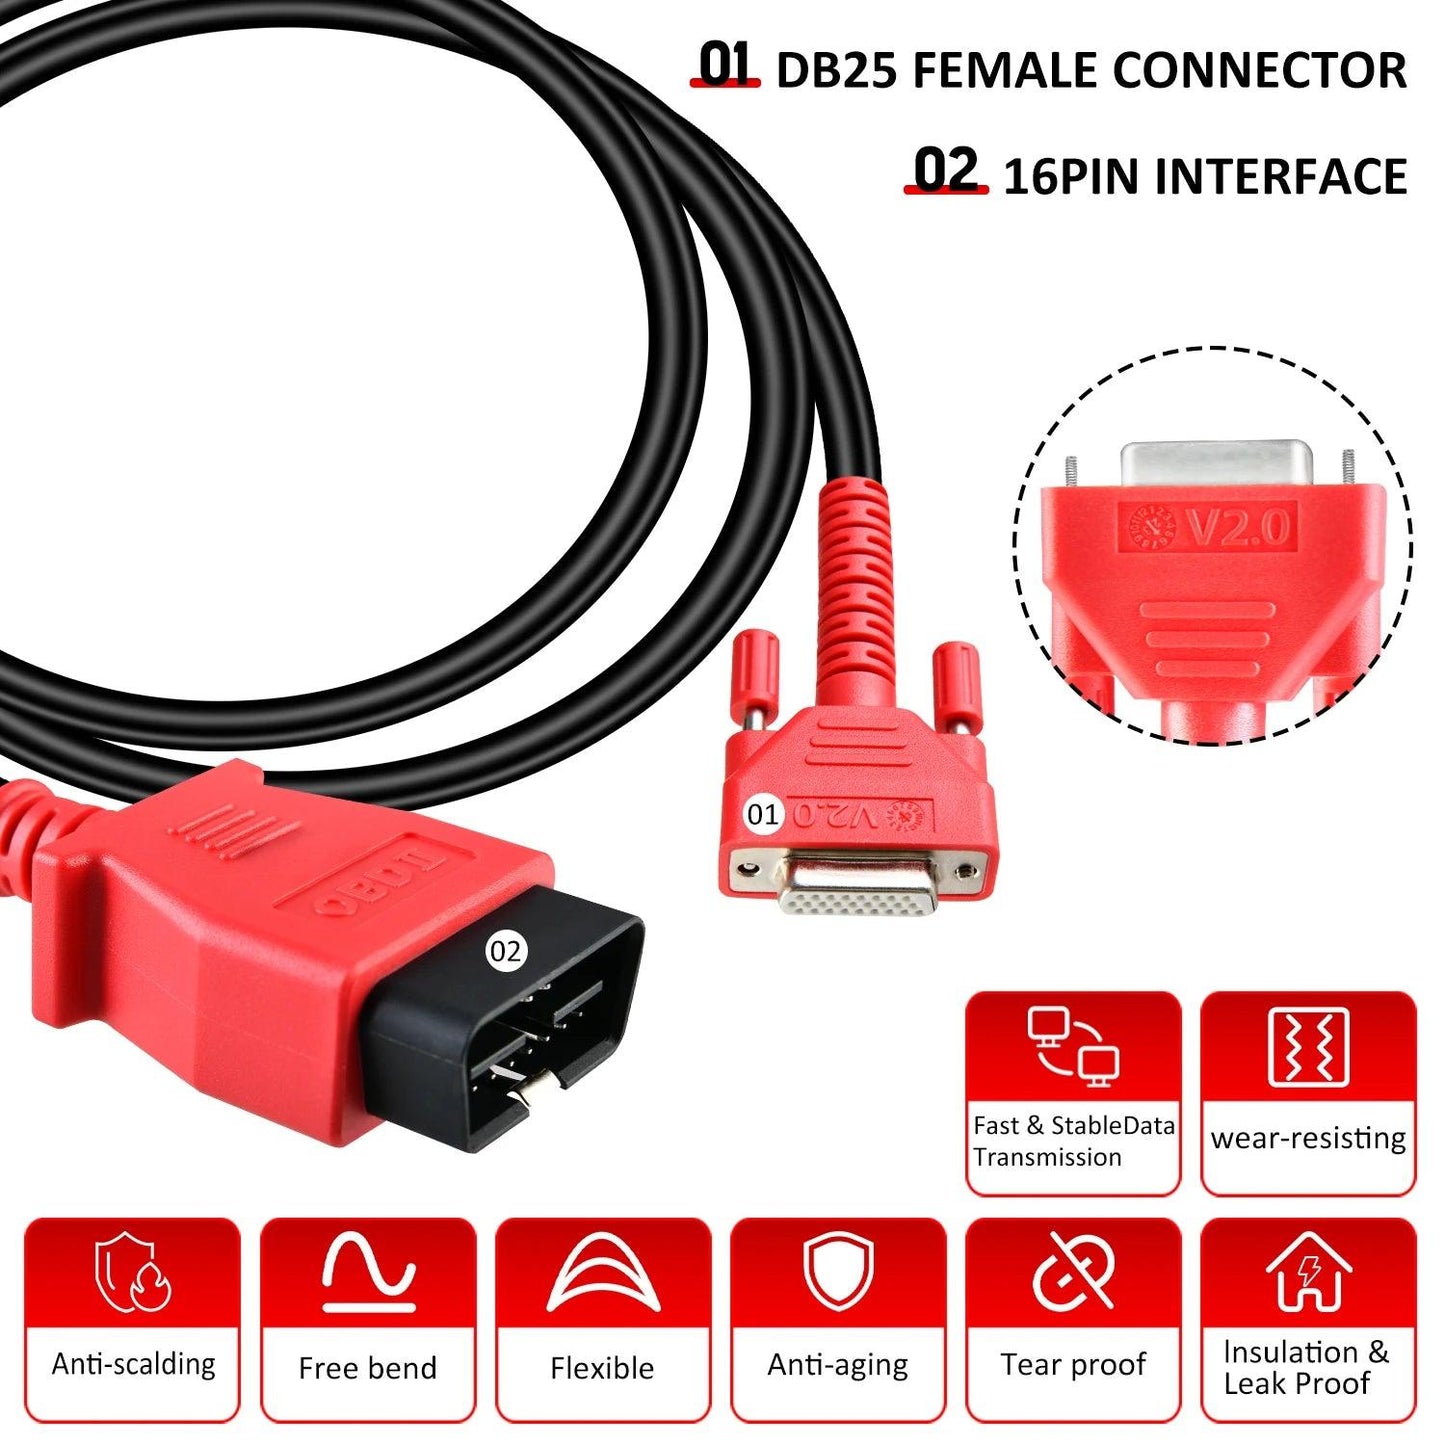 Autel Original OBD2 Cable Programming Cable DB25 Female OBDII Main Cable for Autel Diagnostic Scanner MS908, MS909, Ultra Series - Dynamex